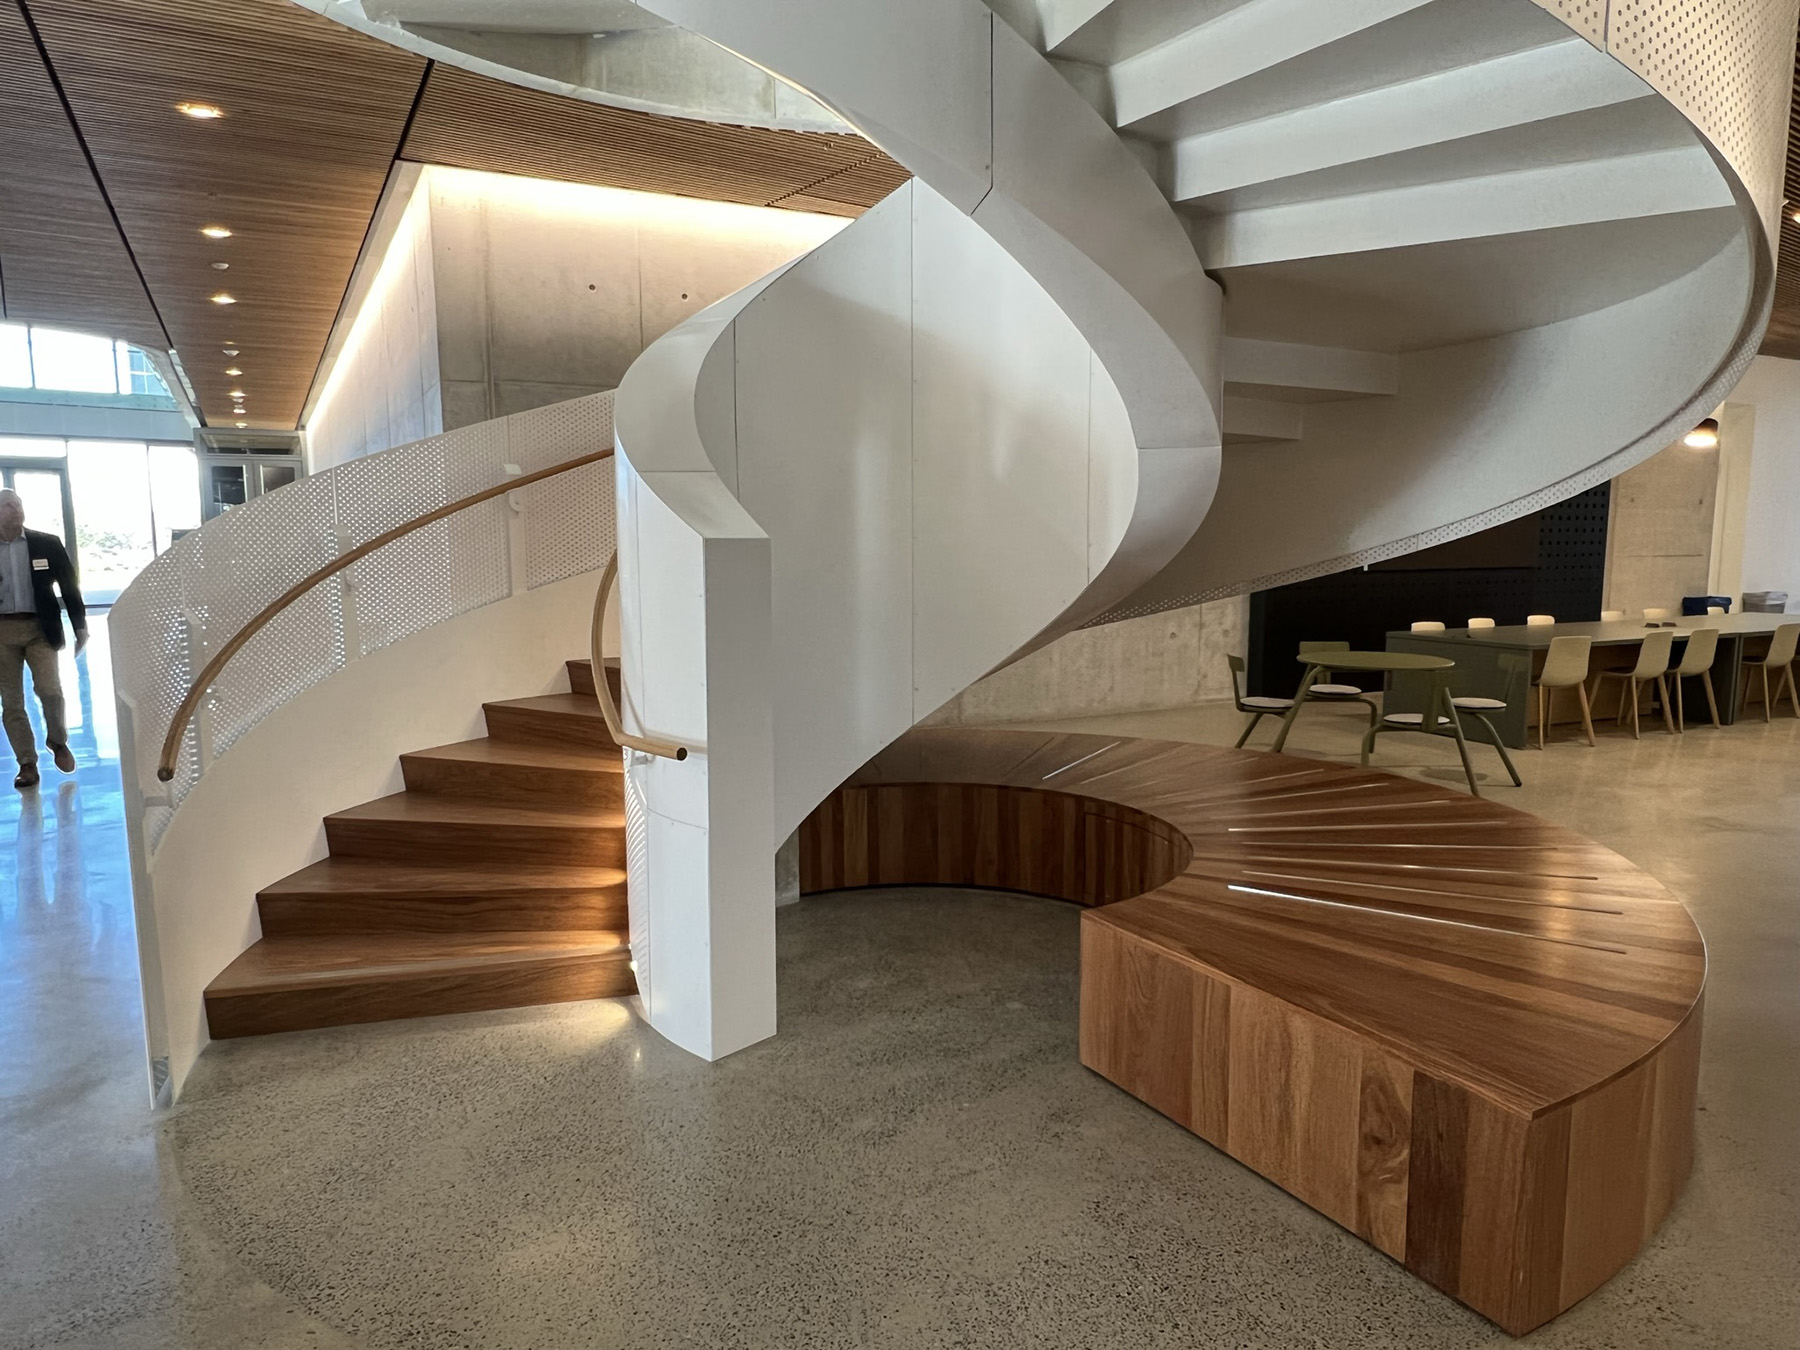 The white steel staircase with wood at its base spirals in the center of the building. 